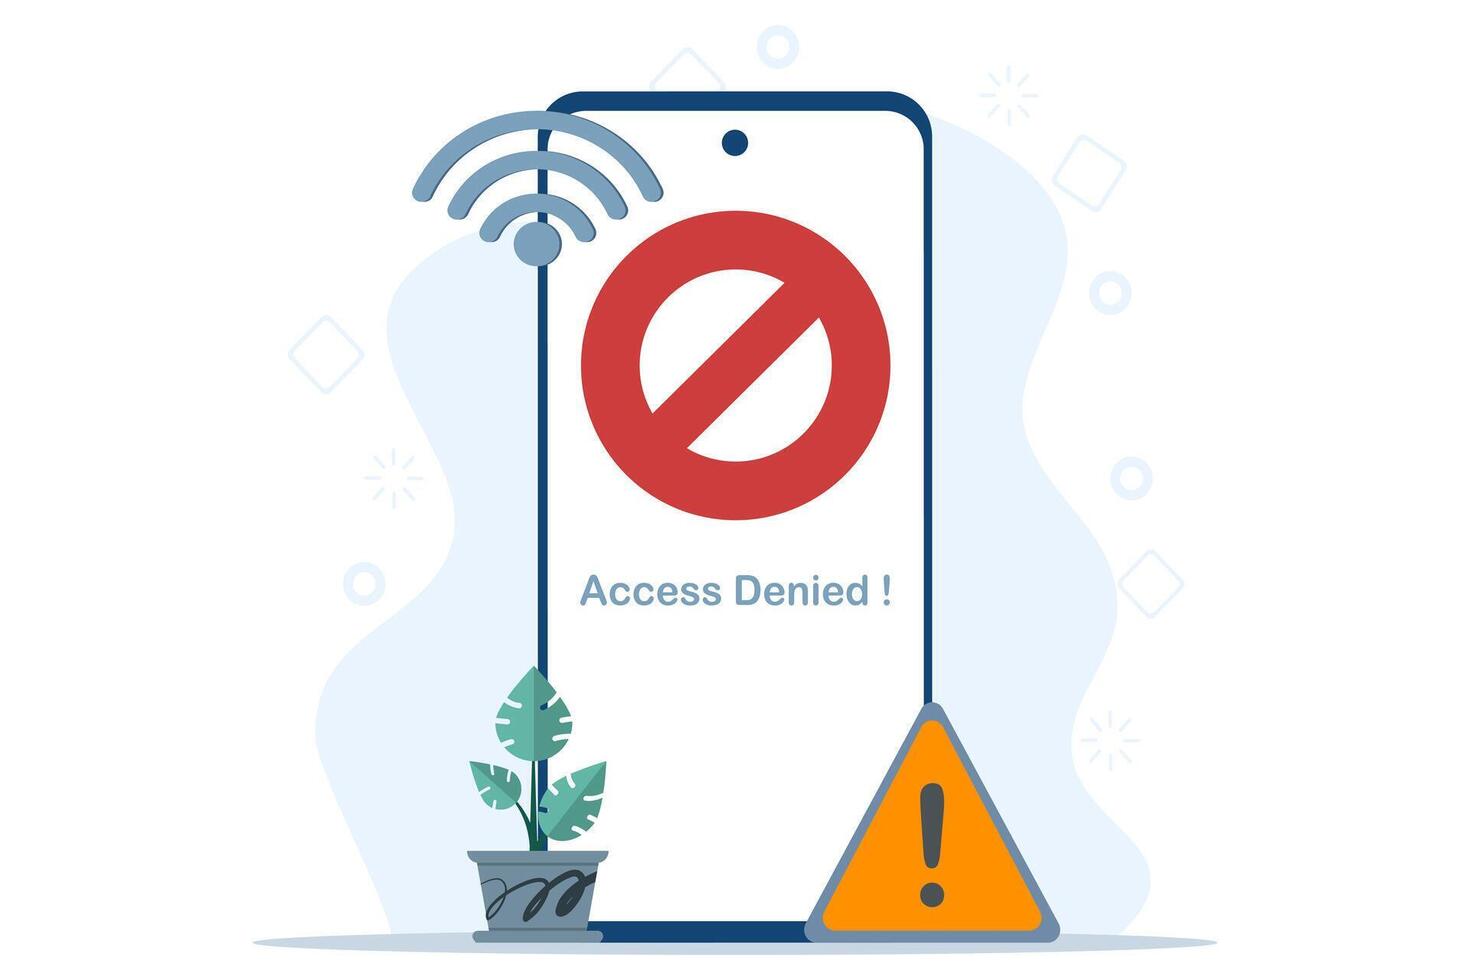 IP address concept, 404 error page, access denied, account block, little person confused with access denied. Illustration for websites, landing pages, mobile apps, posters and banners. vector